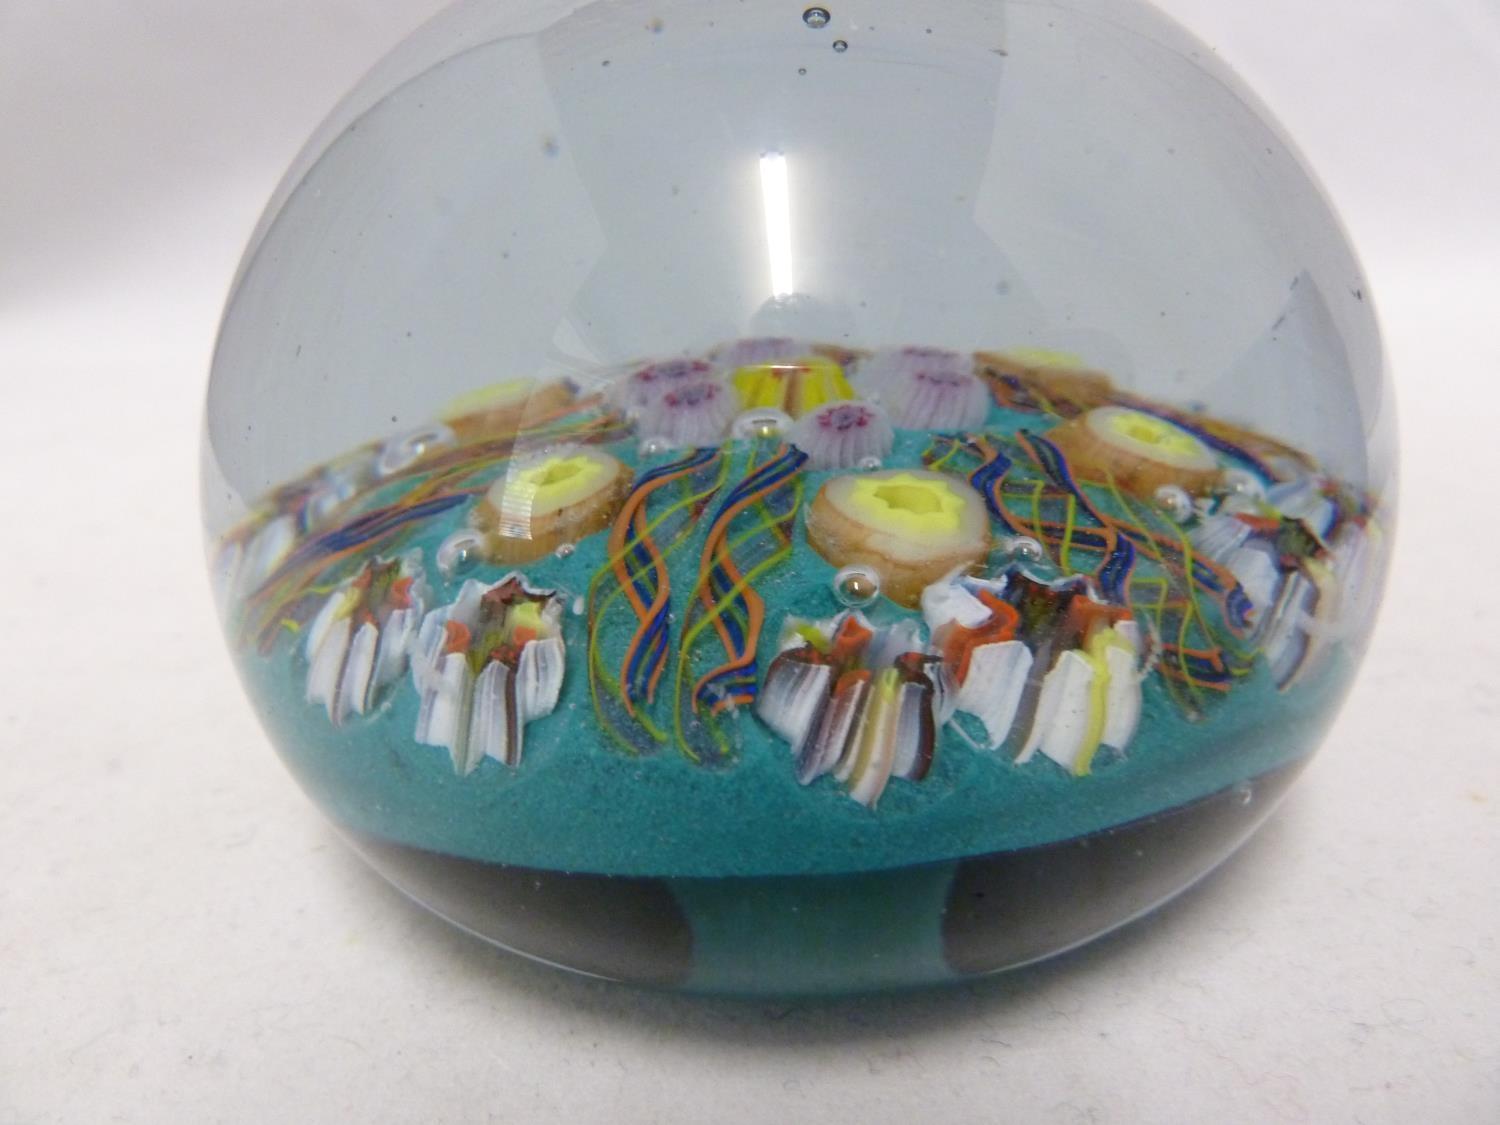 Strathern Glass - a boxed millifiori and barley twist cane glass paperweight; and a Salvador Ysart - Image 7 of 8